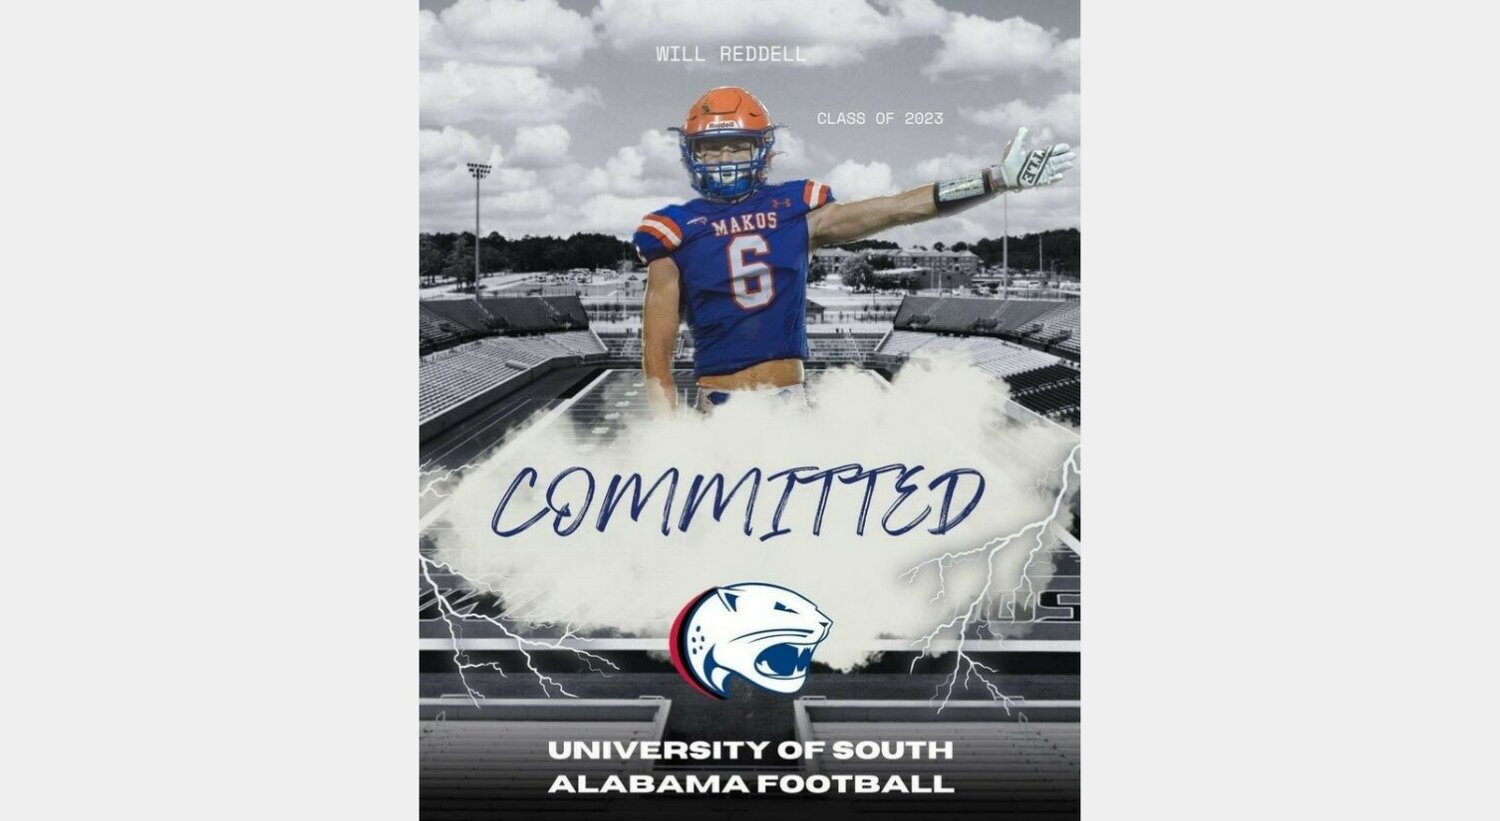 Will Reddell announced his commitment to the South Alabama Jaguars on Friday, July 7, after he helped the Orange Beach Makos record the most points in program history.